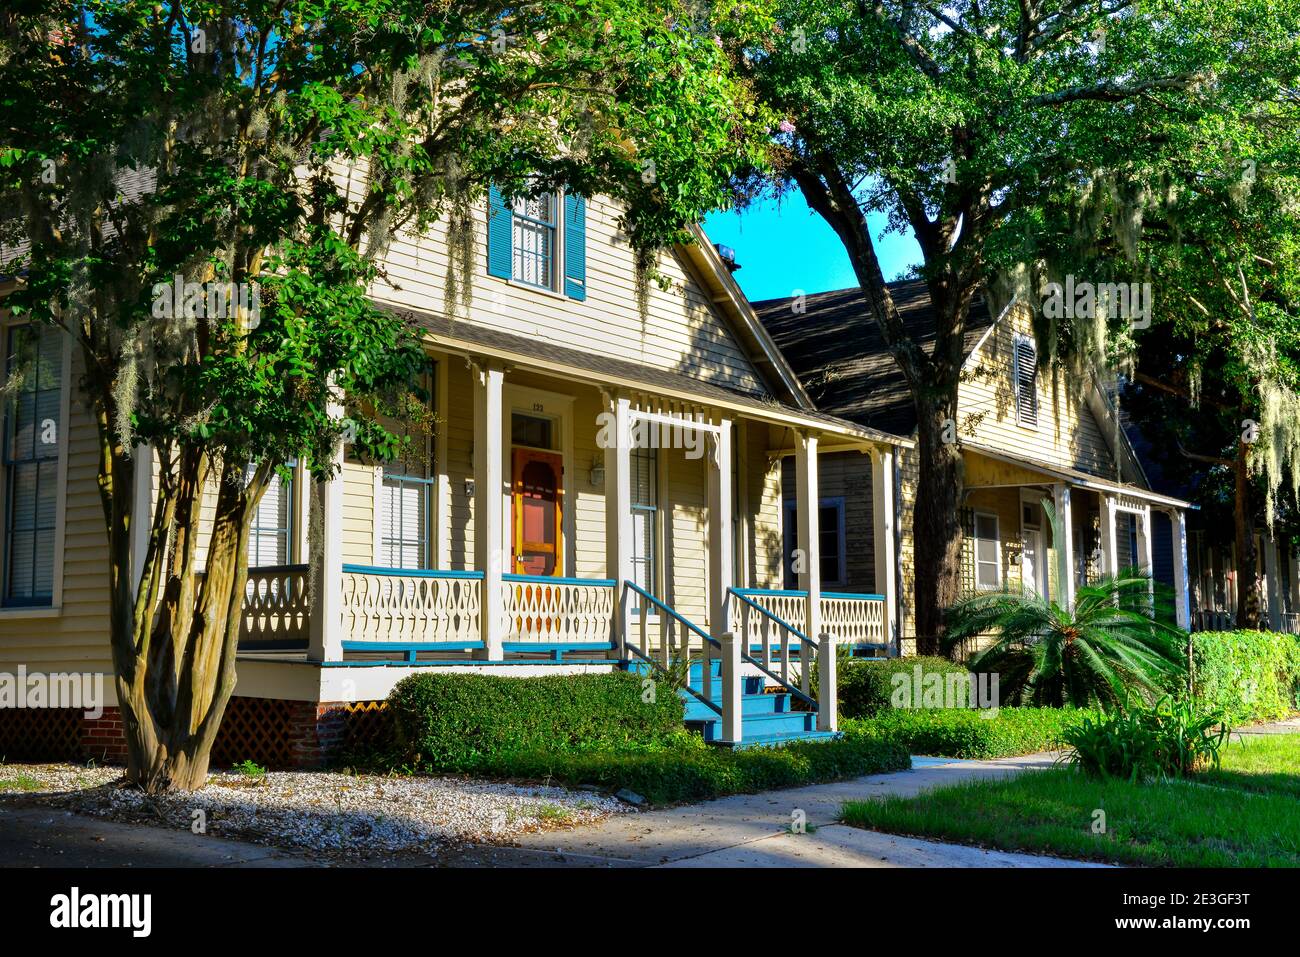 Old Florida style bungalows with front porches on Amelia Island, in historic downtown with trees hosting Spanish Moss in Fernandina Beach, FL Stock Photo